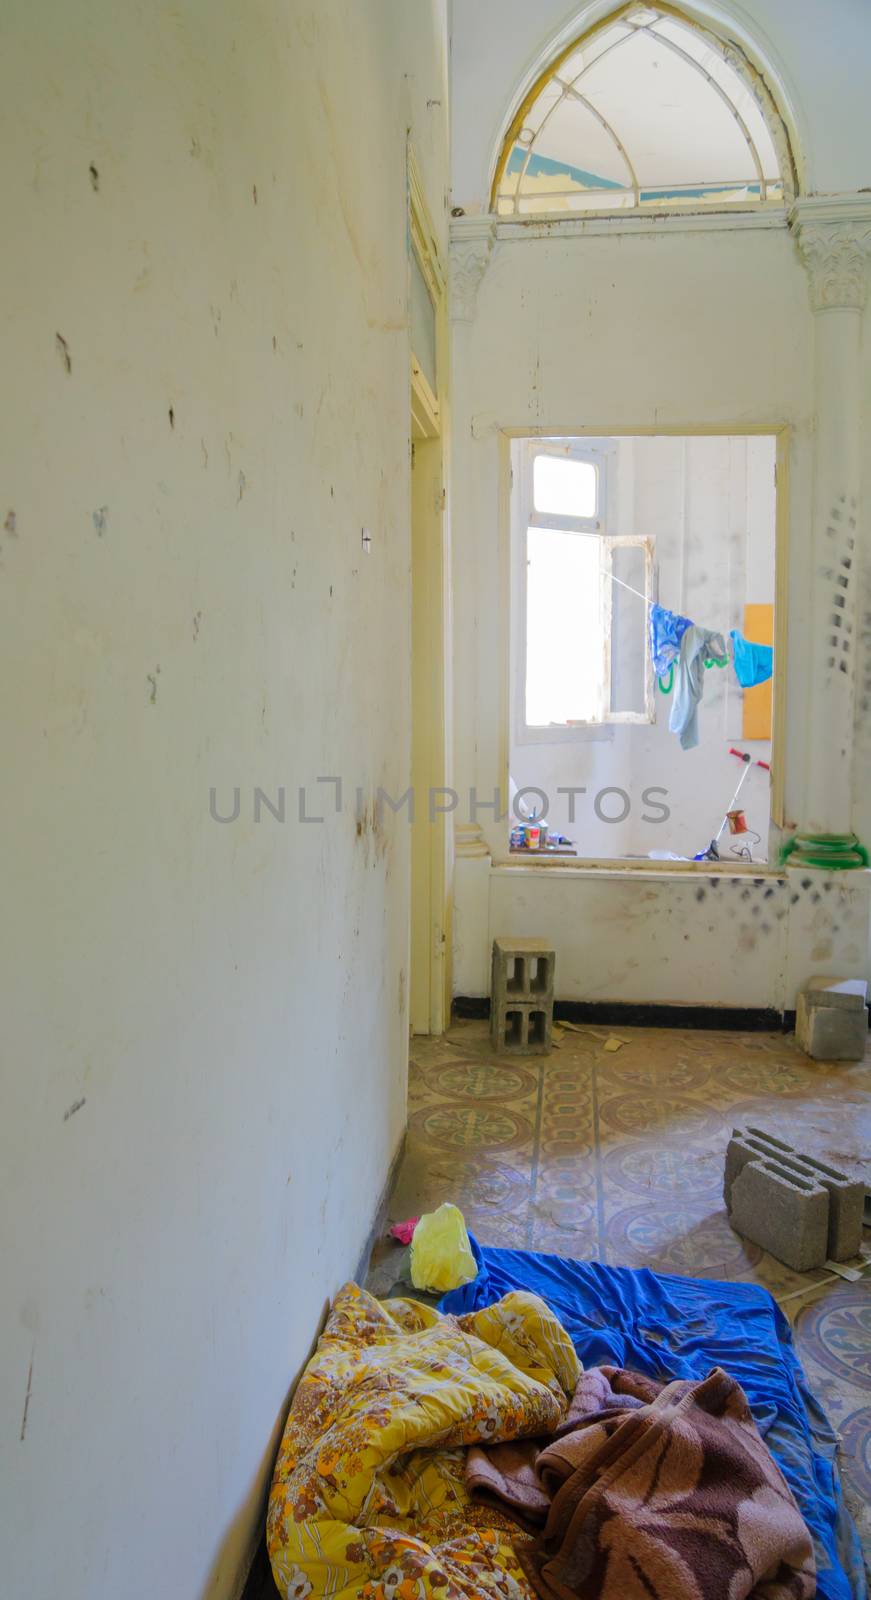 TEL-AVIV, ISRAEL - MAY 27, 2016: A deserted old house, used by young homeless as a shelter. In Jaffa, Southern part of Tel-Aviv Yafo, Israel